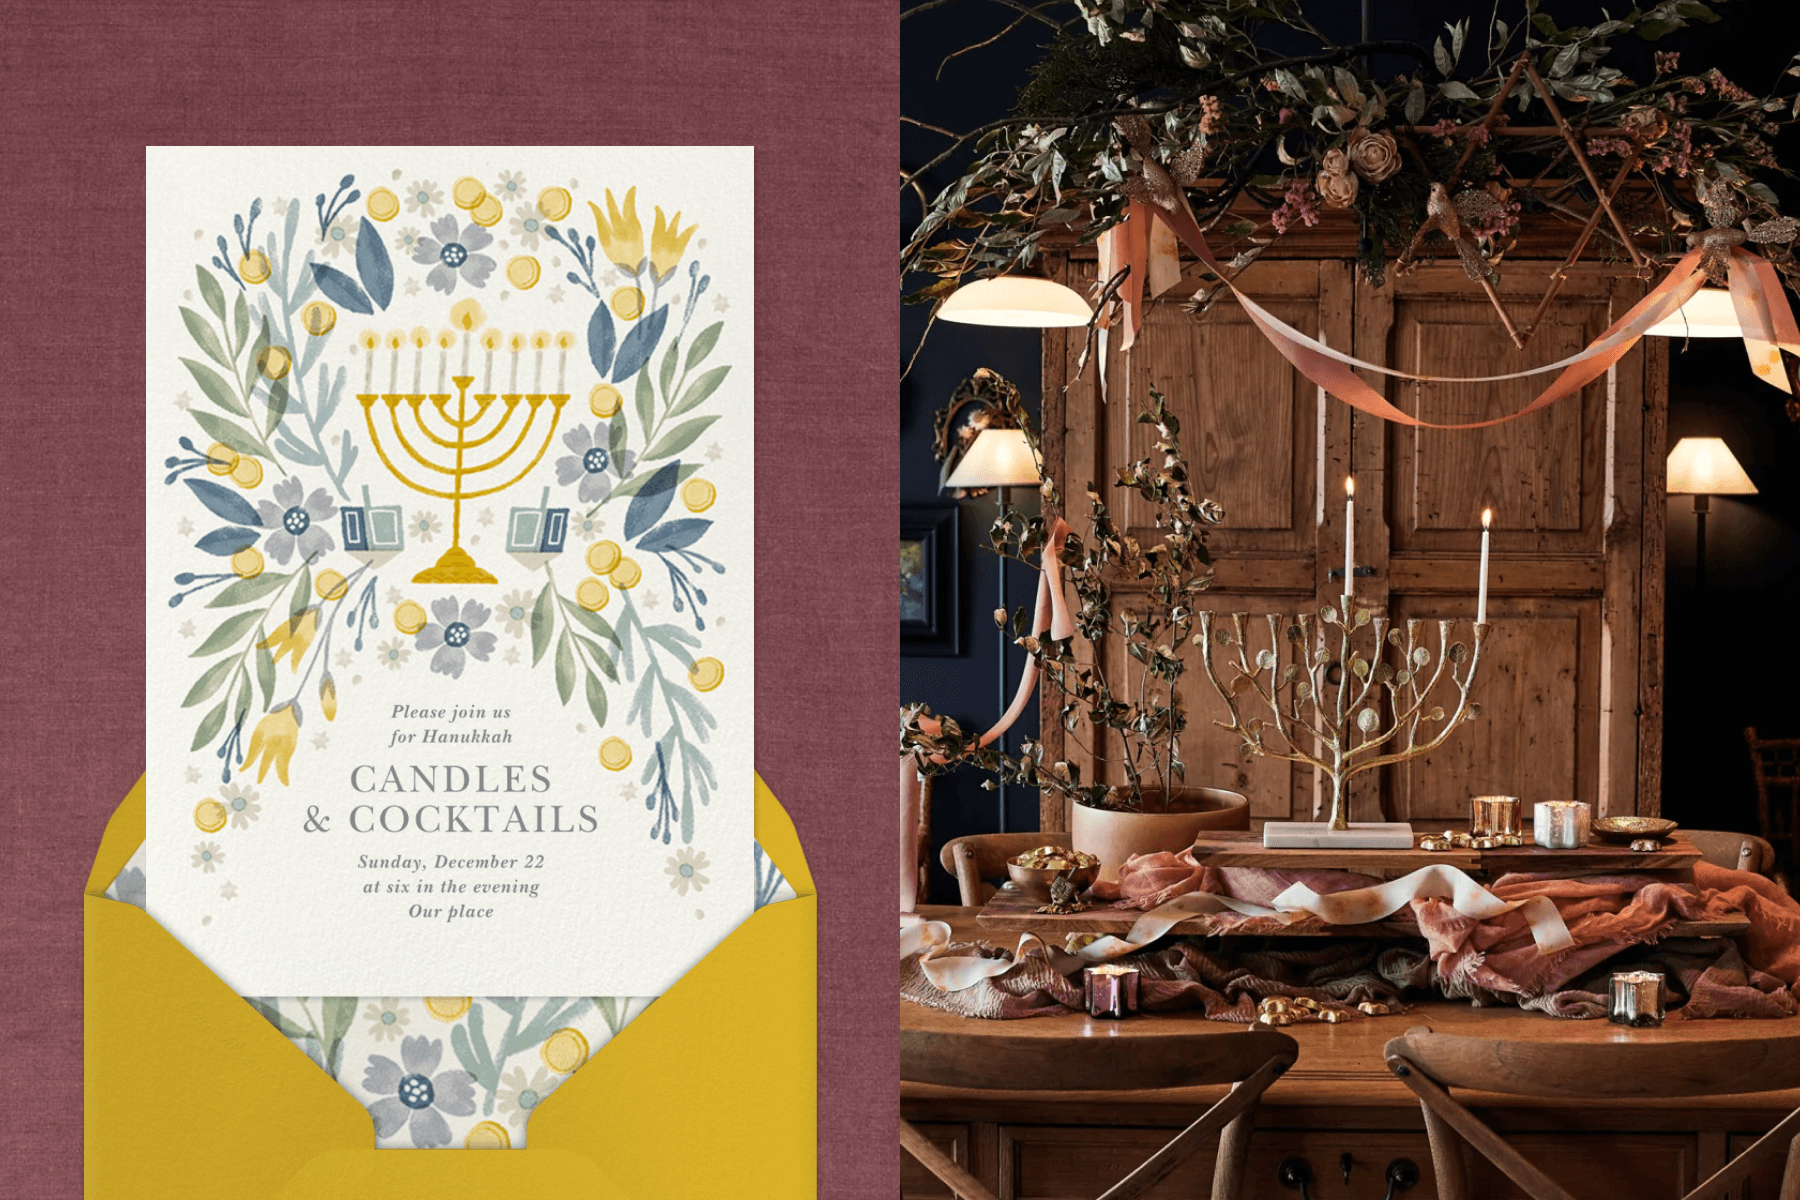 Left: A Hanukkah party invitation with a small Chanukkiah surrounded by blue, yellow, and green flowers and dreidels above a yellow envelope. Right: A tree-shaped Chanukkiah at an ornately set wooden table with a moody floral arrangement hanging above.